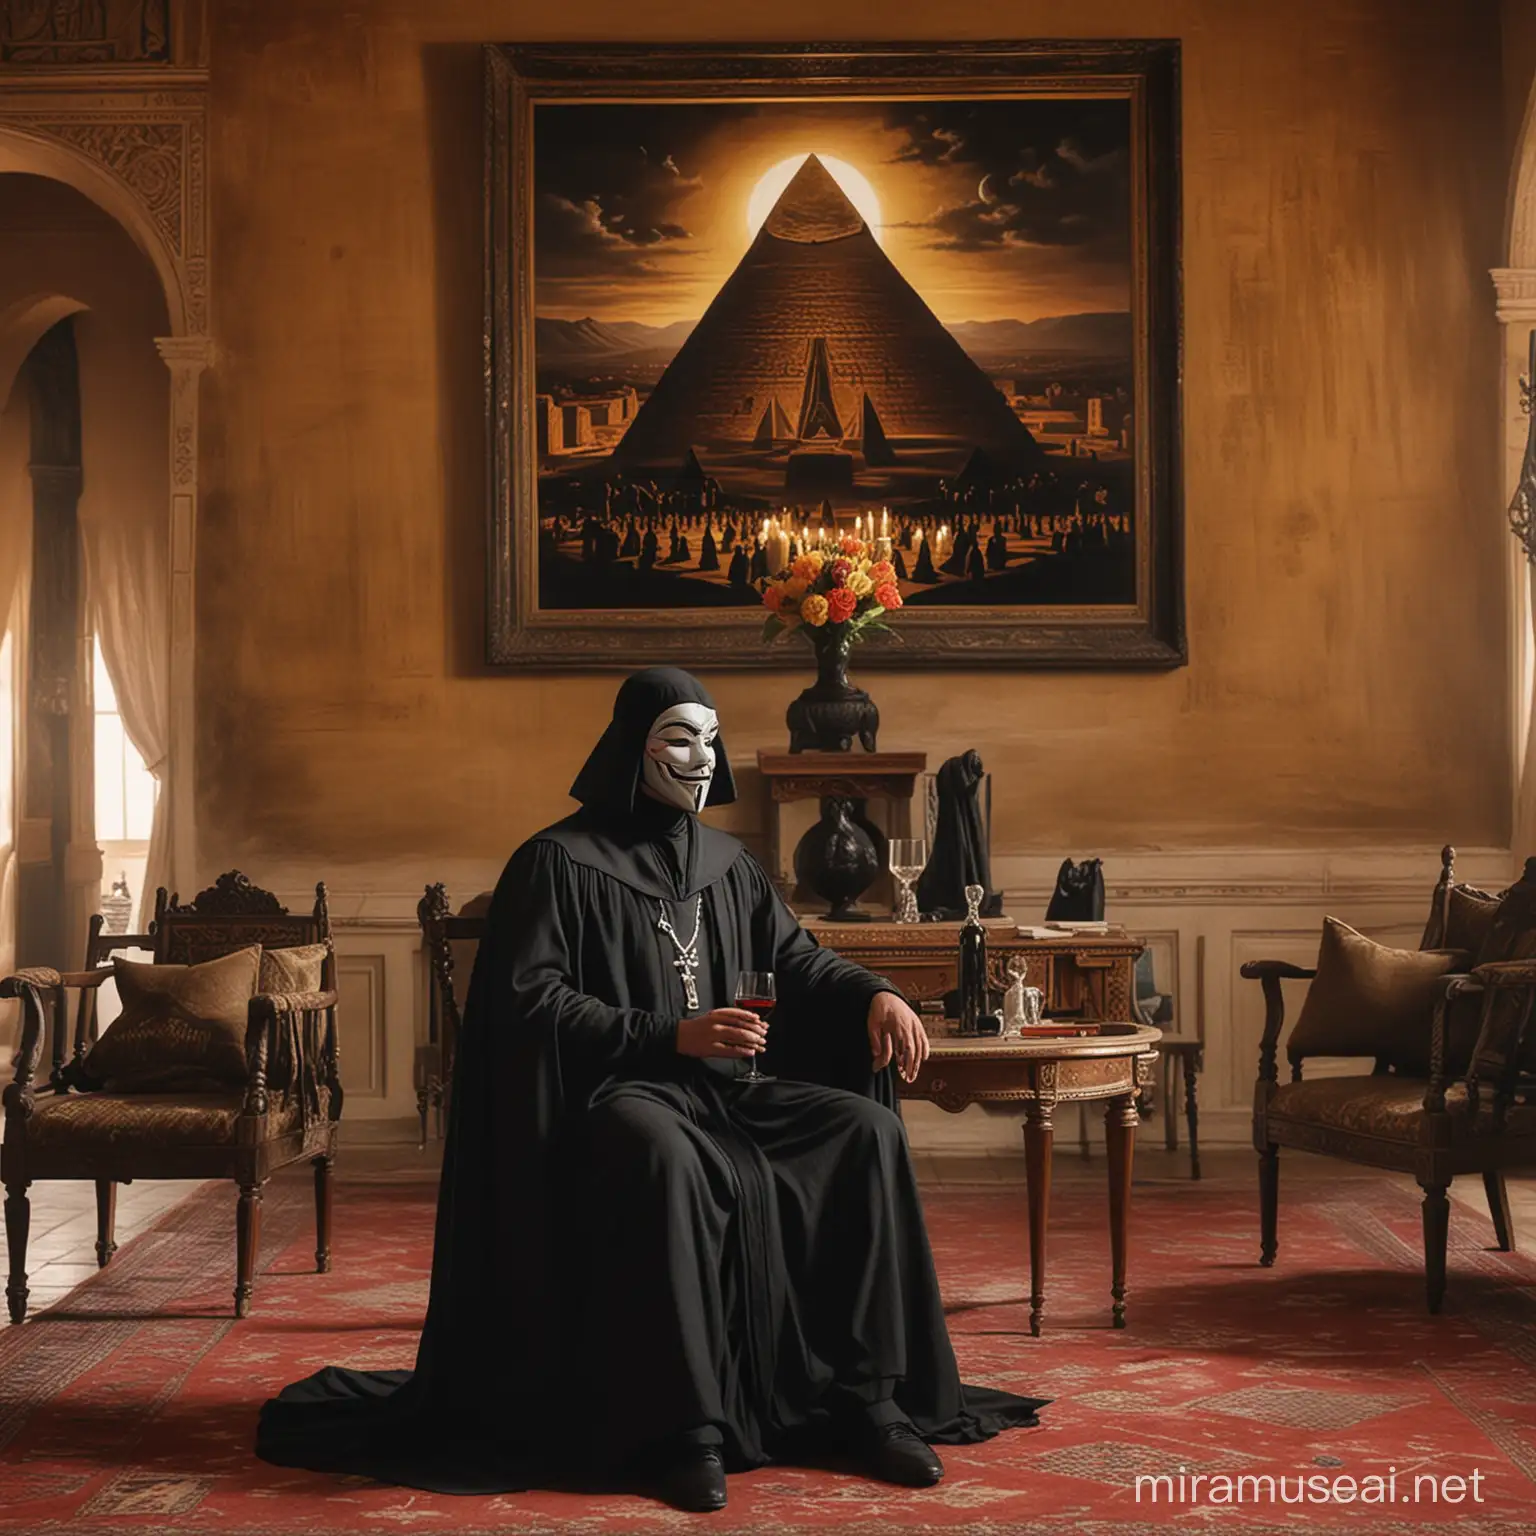 V For Vendetta Relaxing in Palace Room with Pyramids Painting